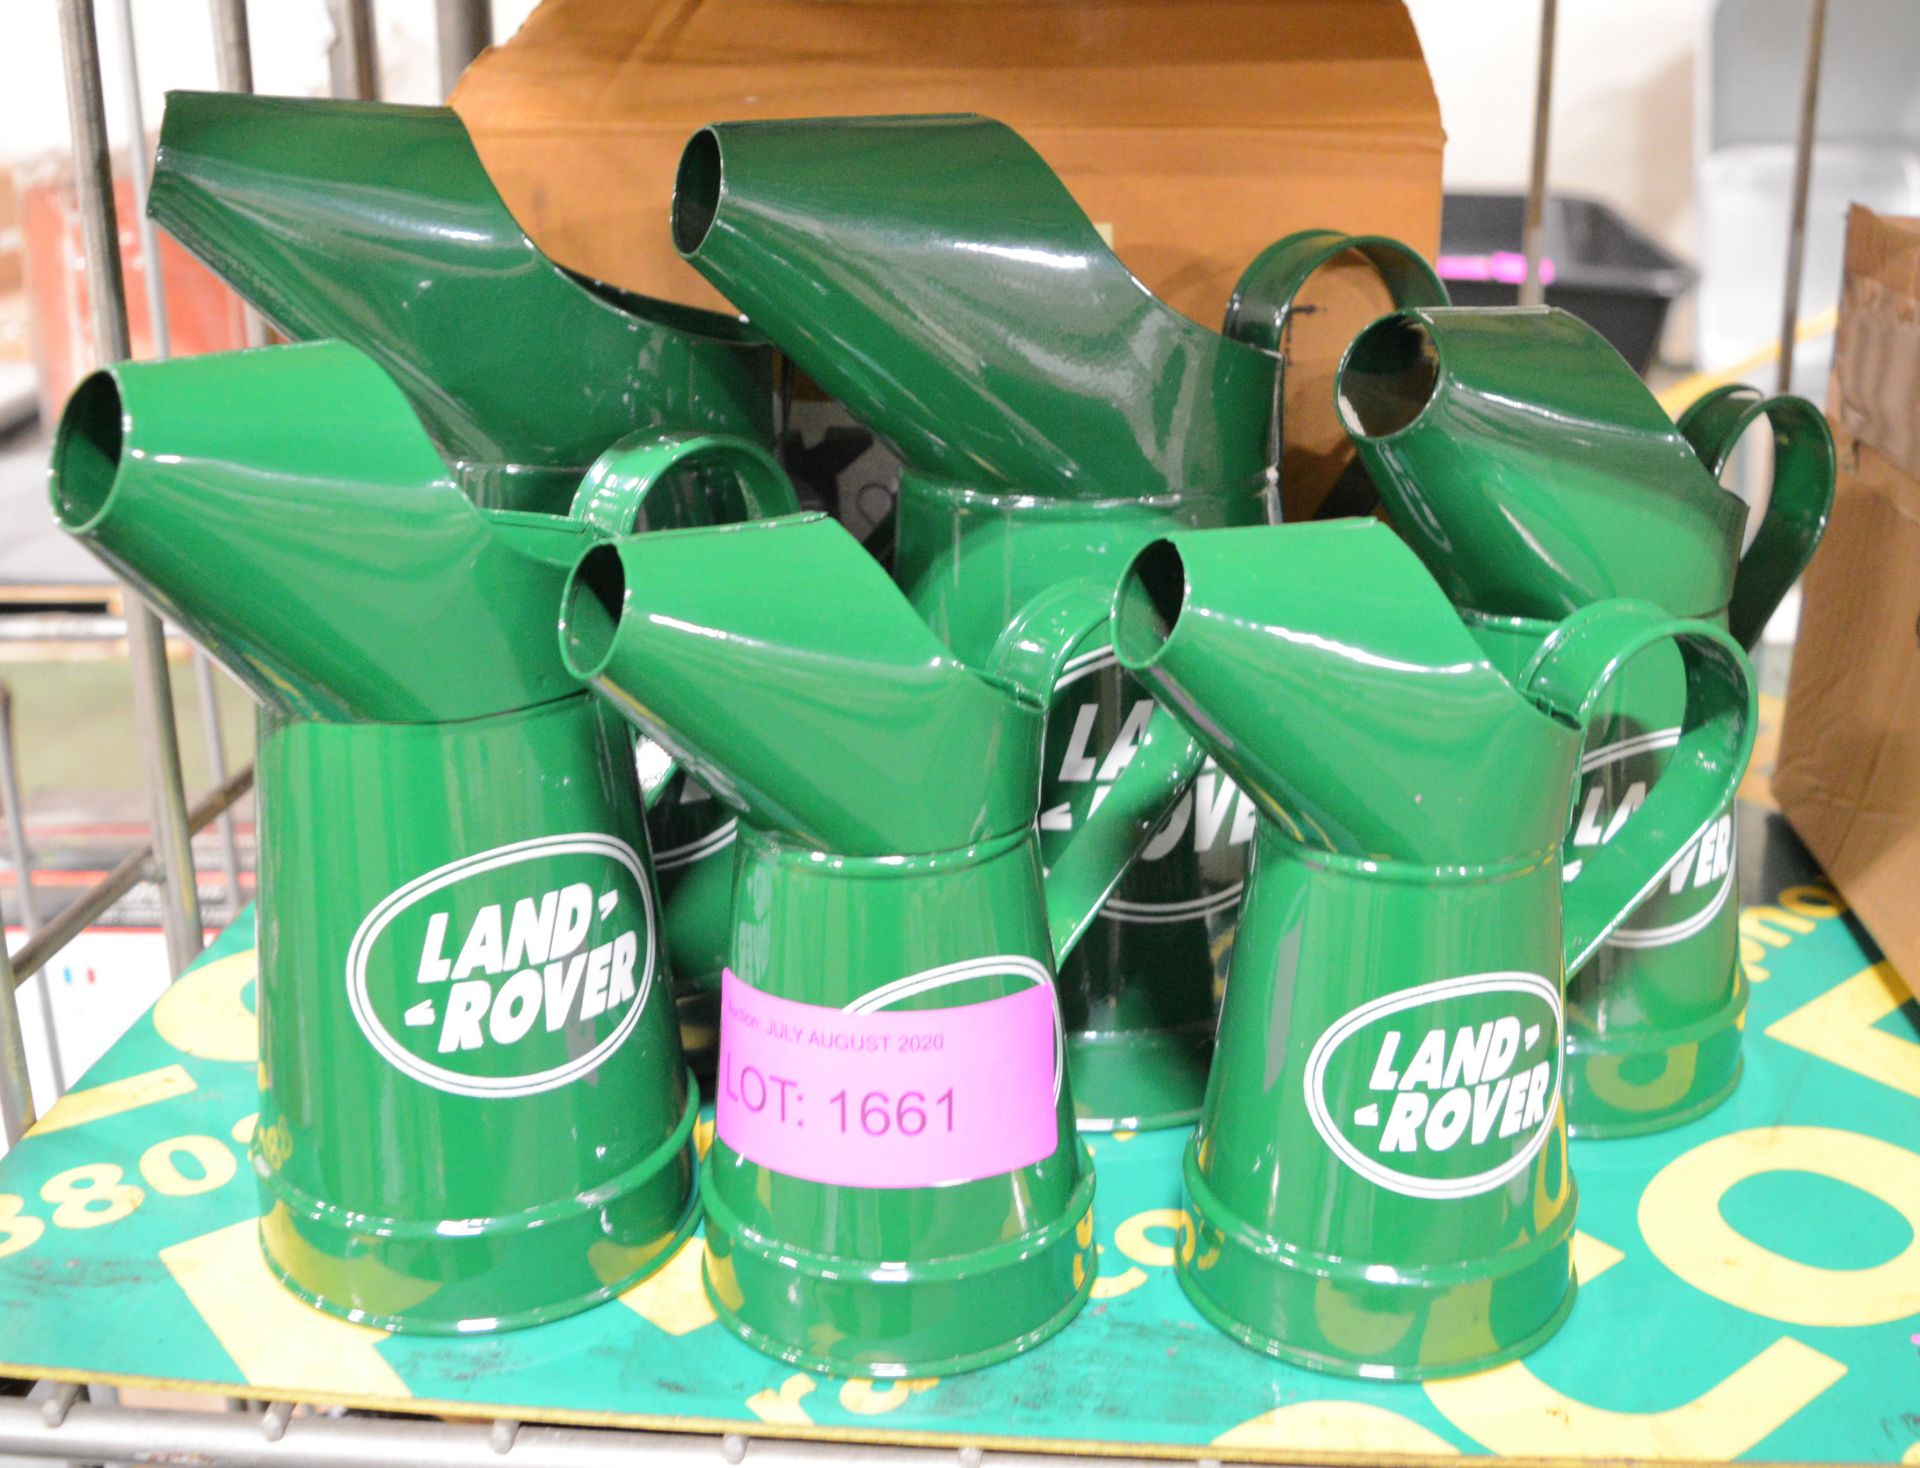 Set of 6 Land Rover Oil Cans.